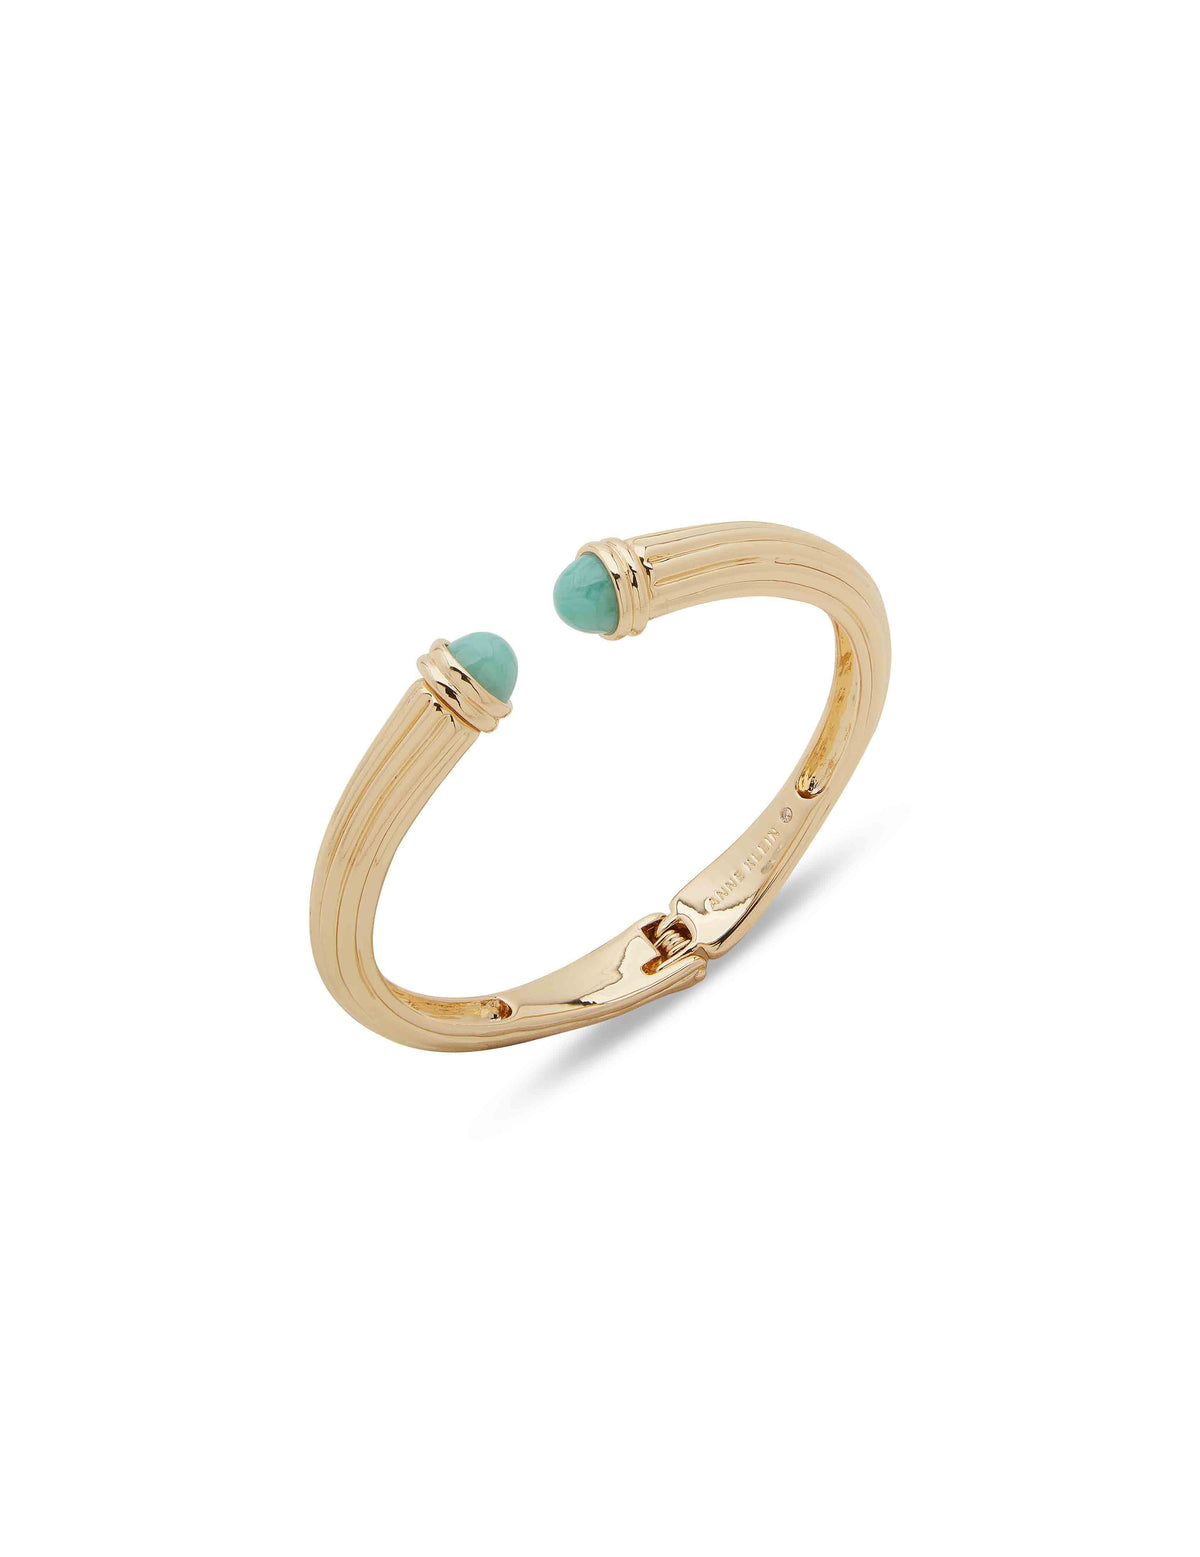 Anne Klein Gold Tone Gold Fluted Cuff Bracelet - Turquoise